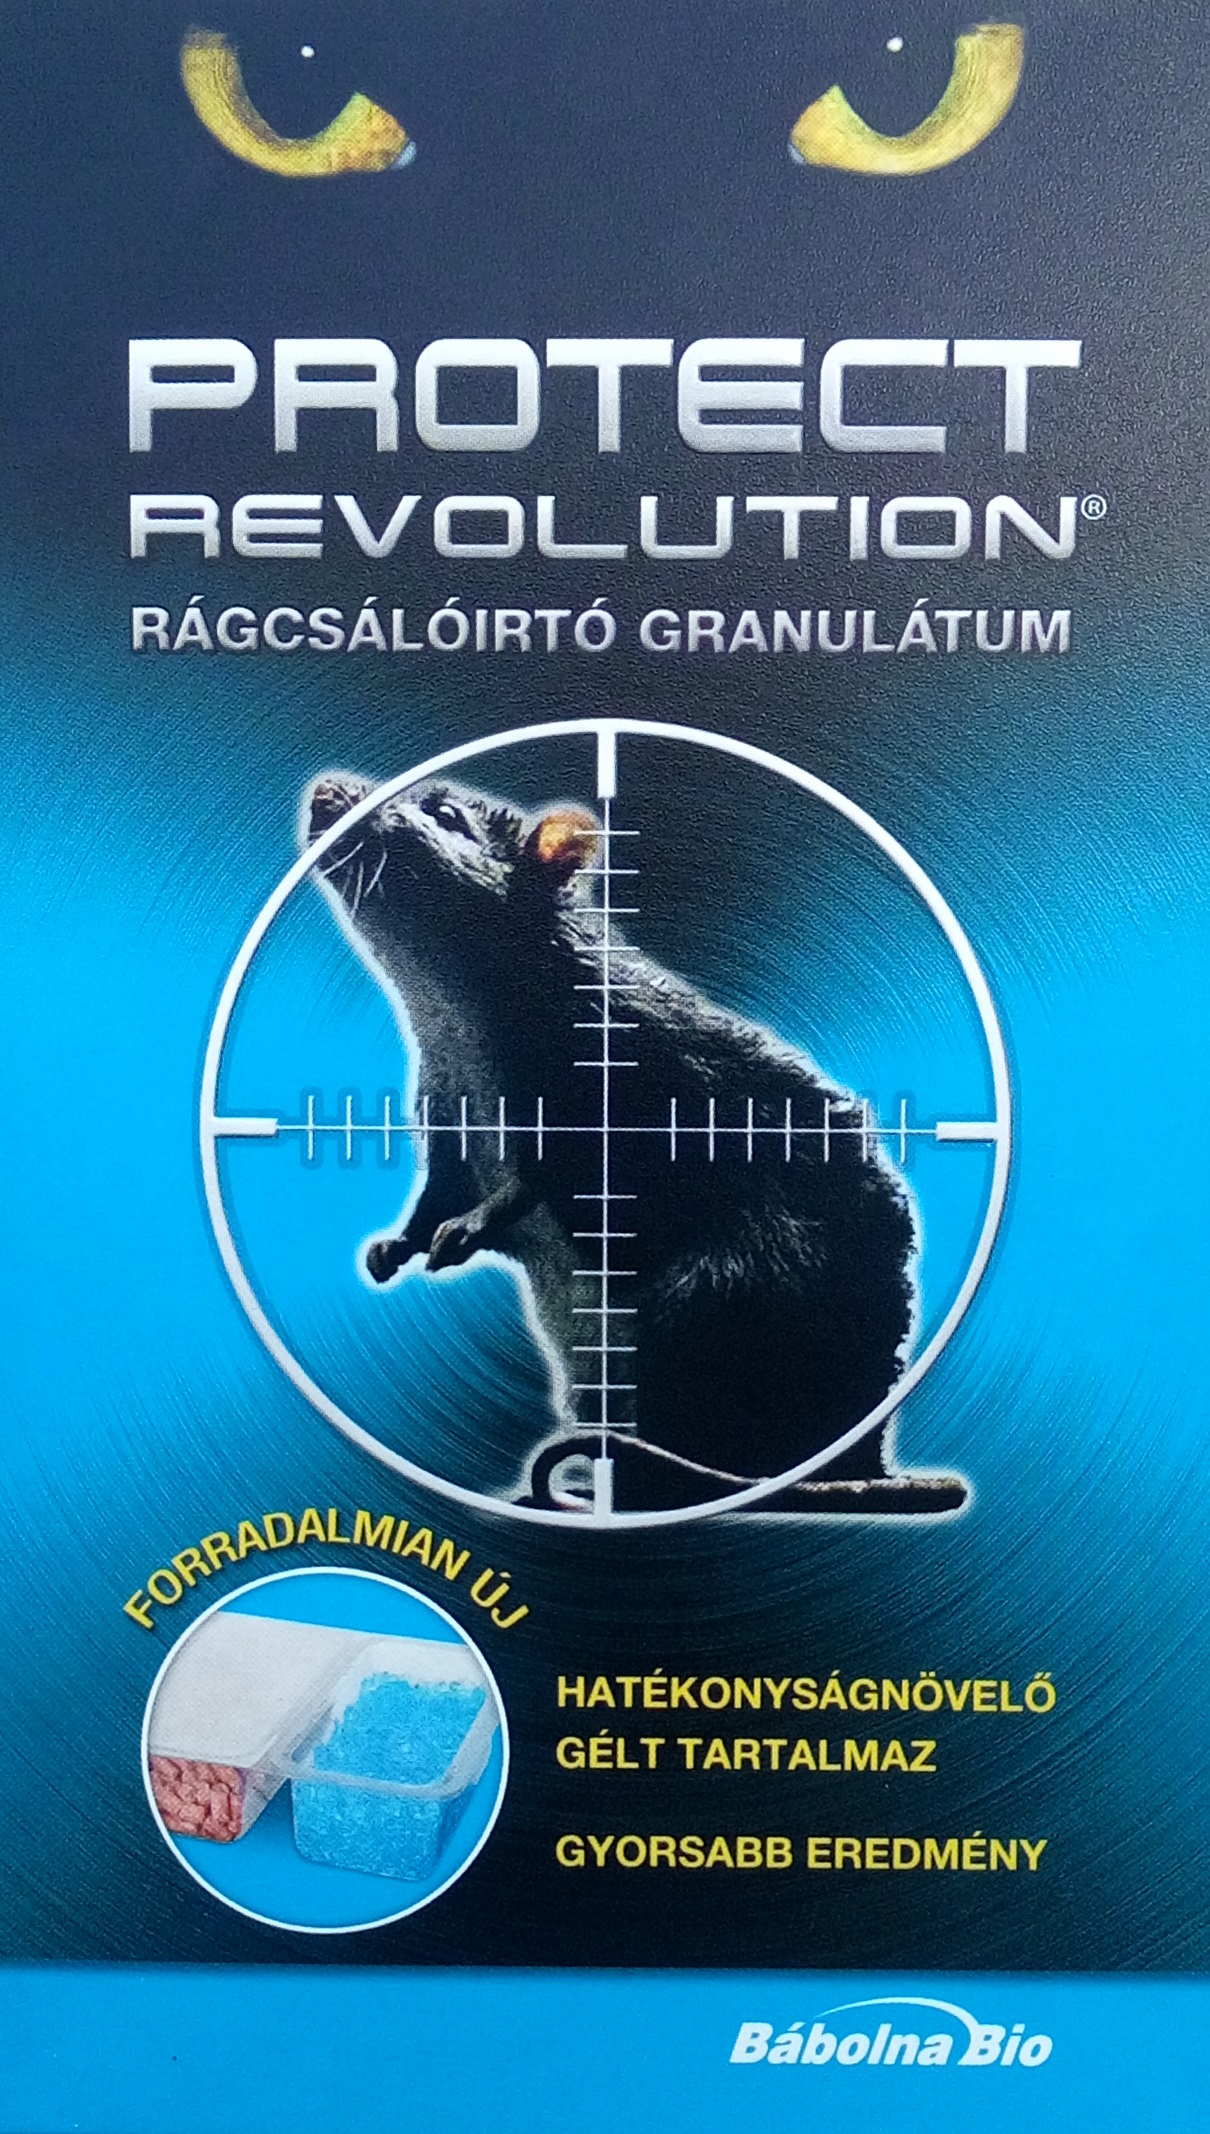 Protect Revolution (2x75g rodenticide + 2x50 g efficacy gel)